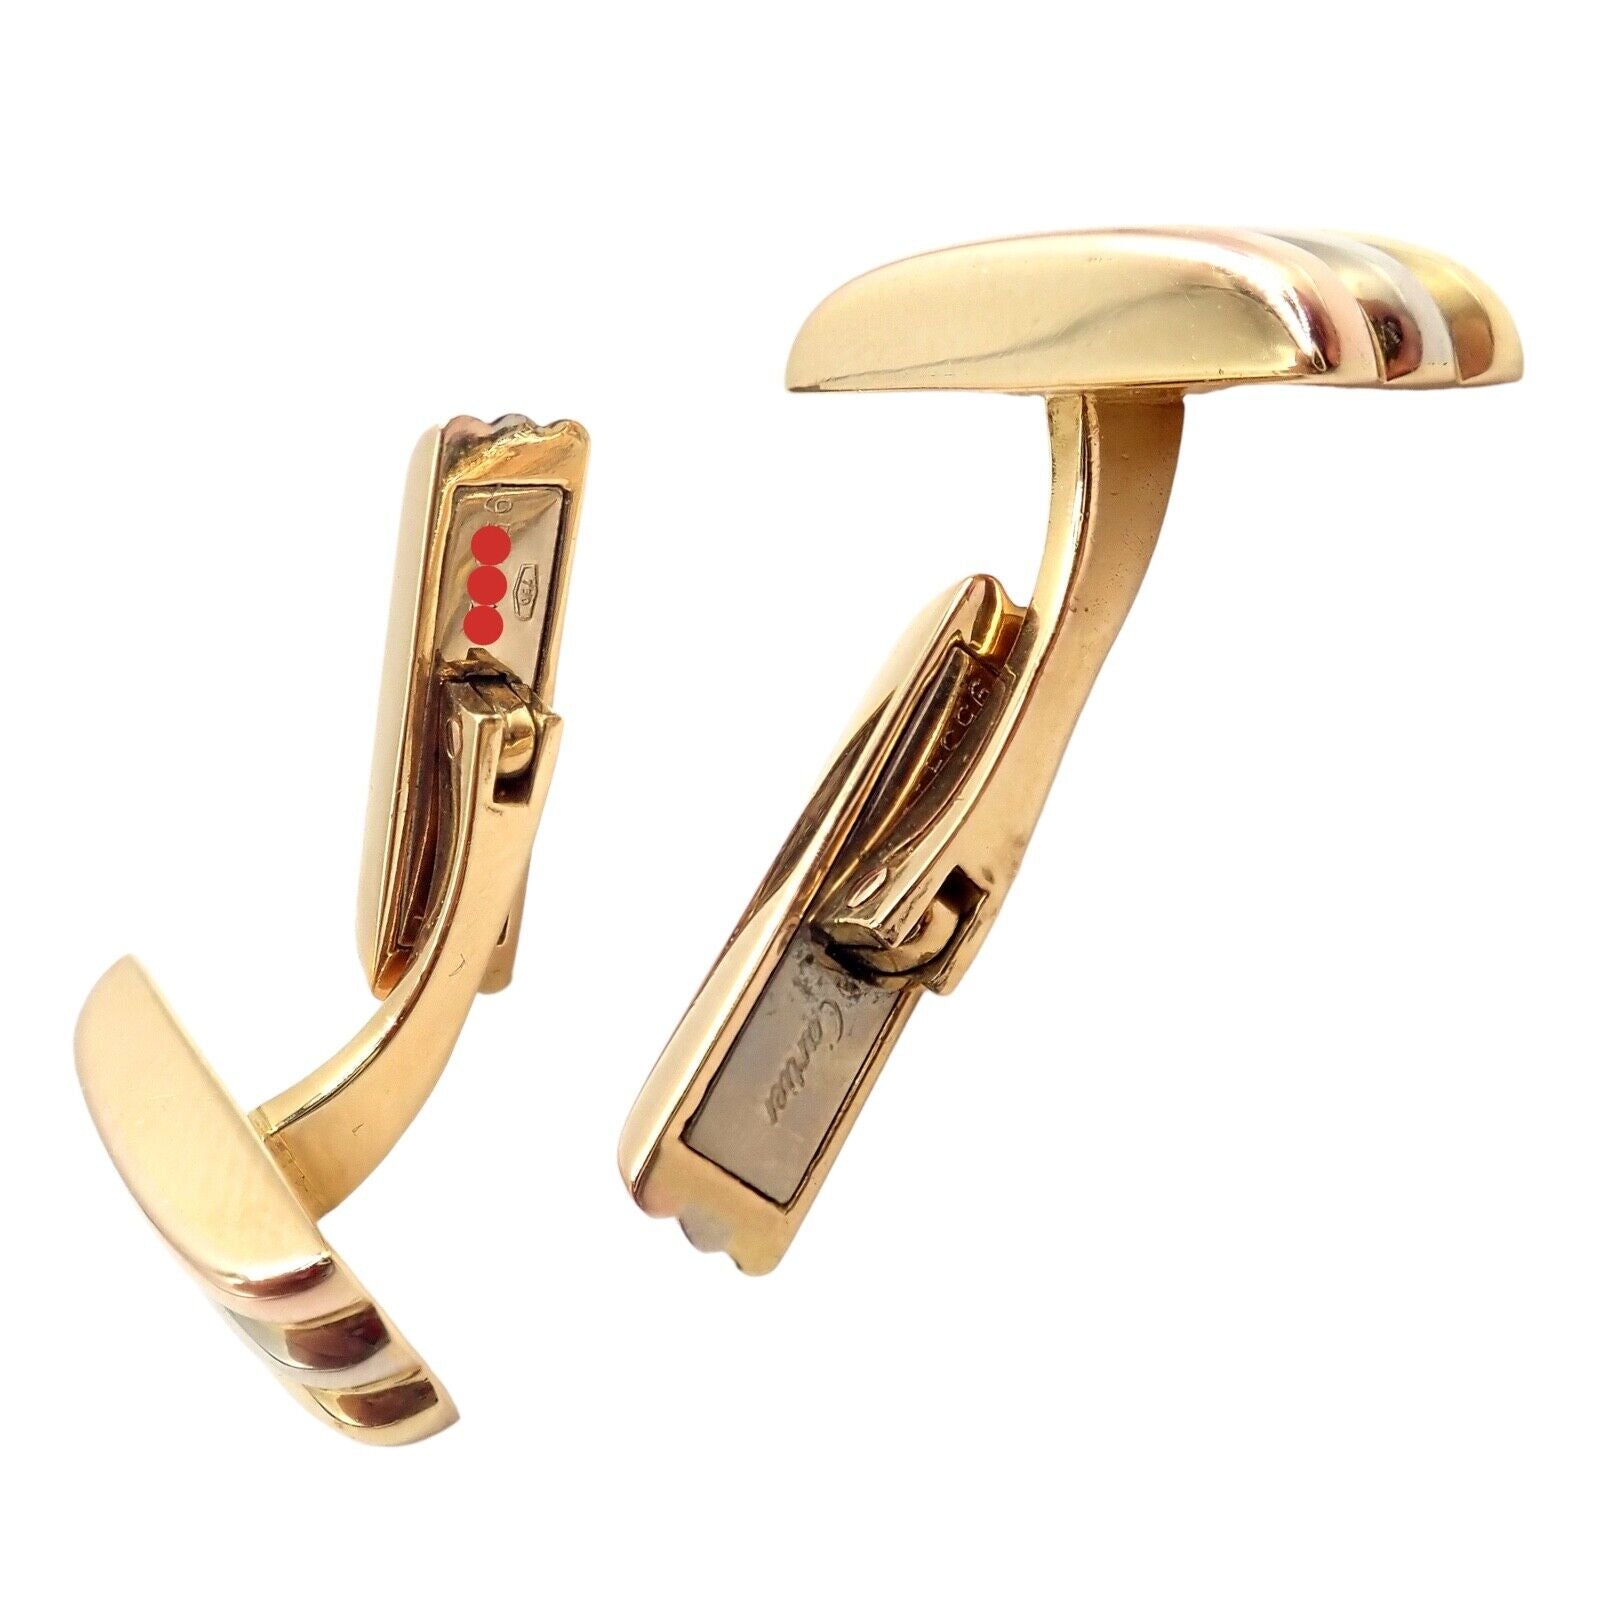 Cartier Jewelry & Watches:Men's Jewelry:Cufflinks Rare! Vintage Authentic Cartier Trinity 18k Tri-Color Gold Cufflinks